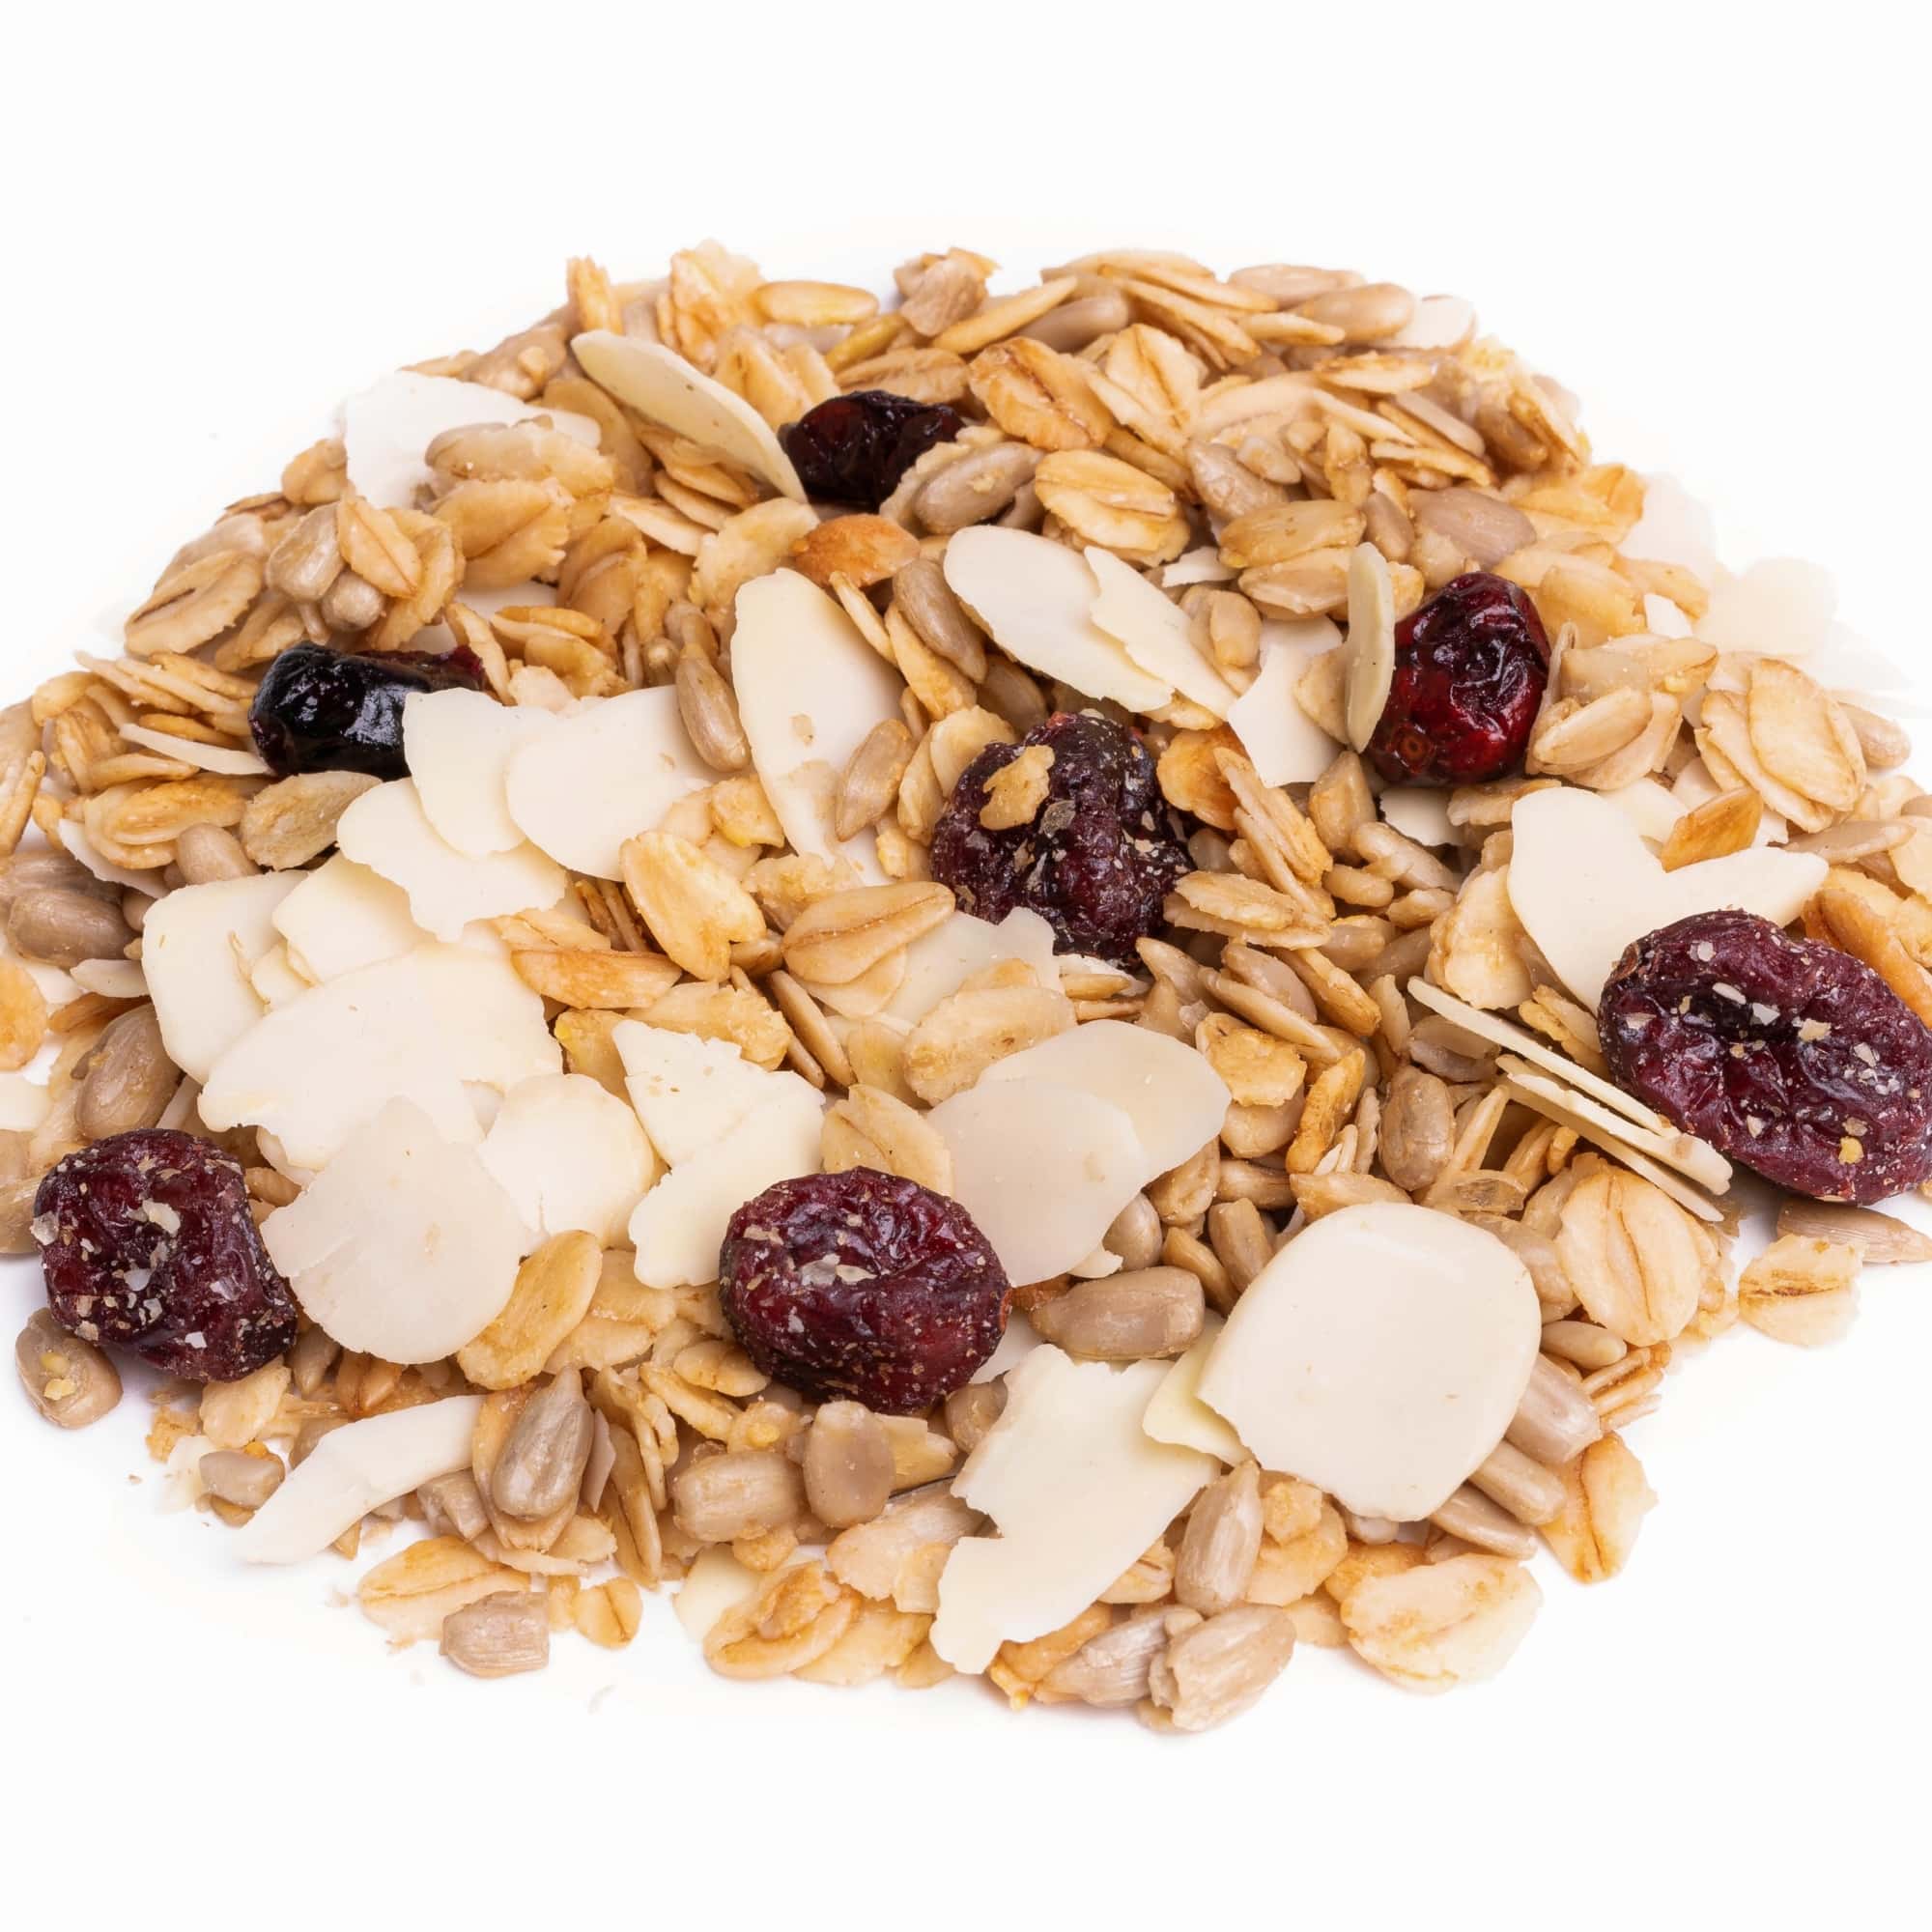 Organic Granola with Almond flakes and Cranberries